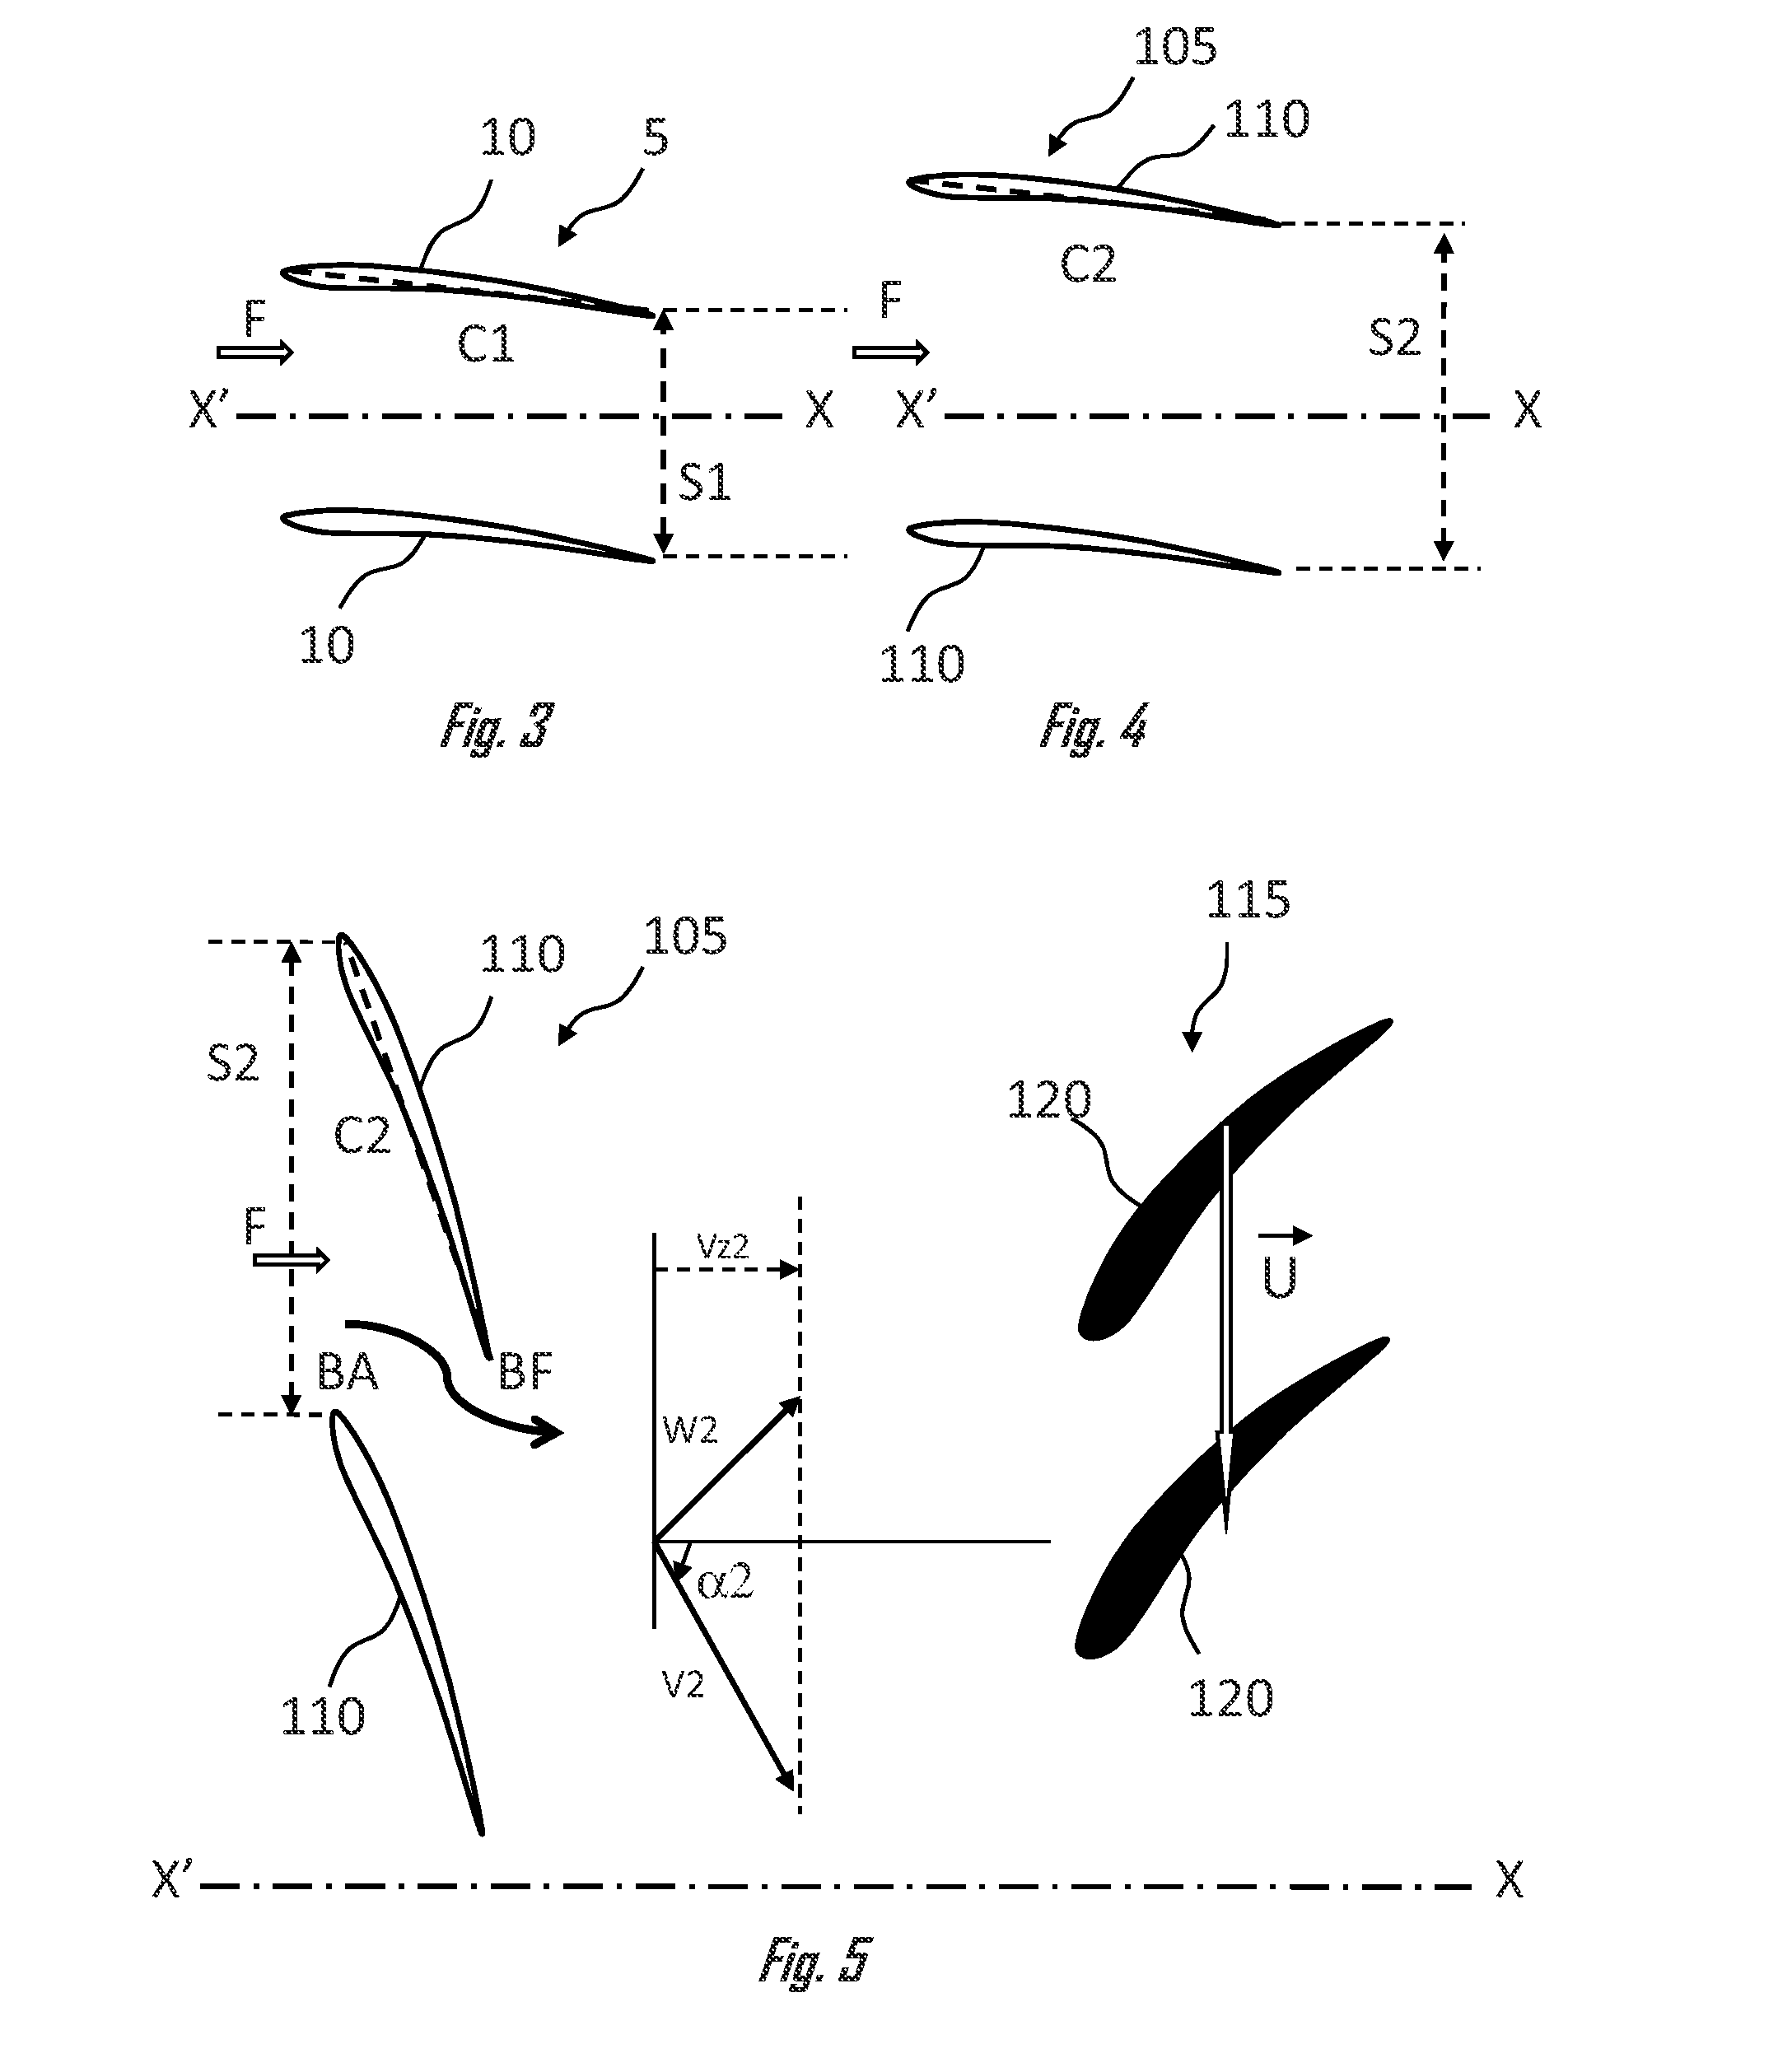 Compression assembly for a turbine engine